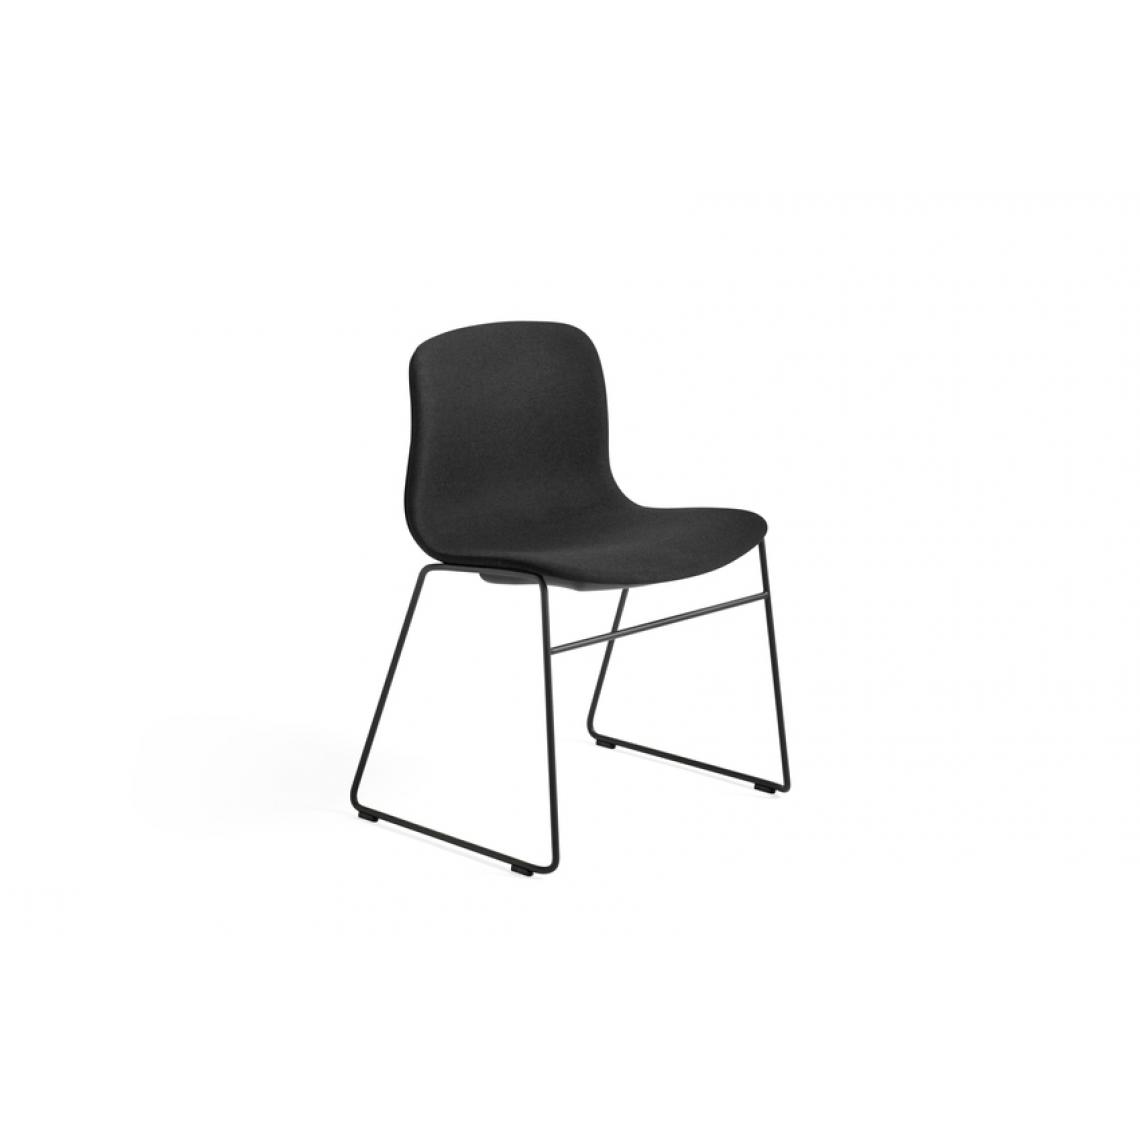 Hay - About a Chair AAC 09 - Steelcut190 - noir - Chaises